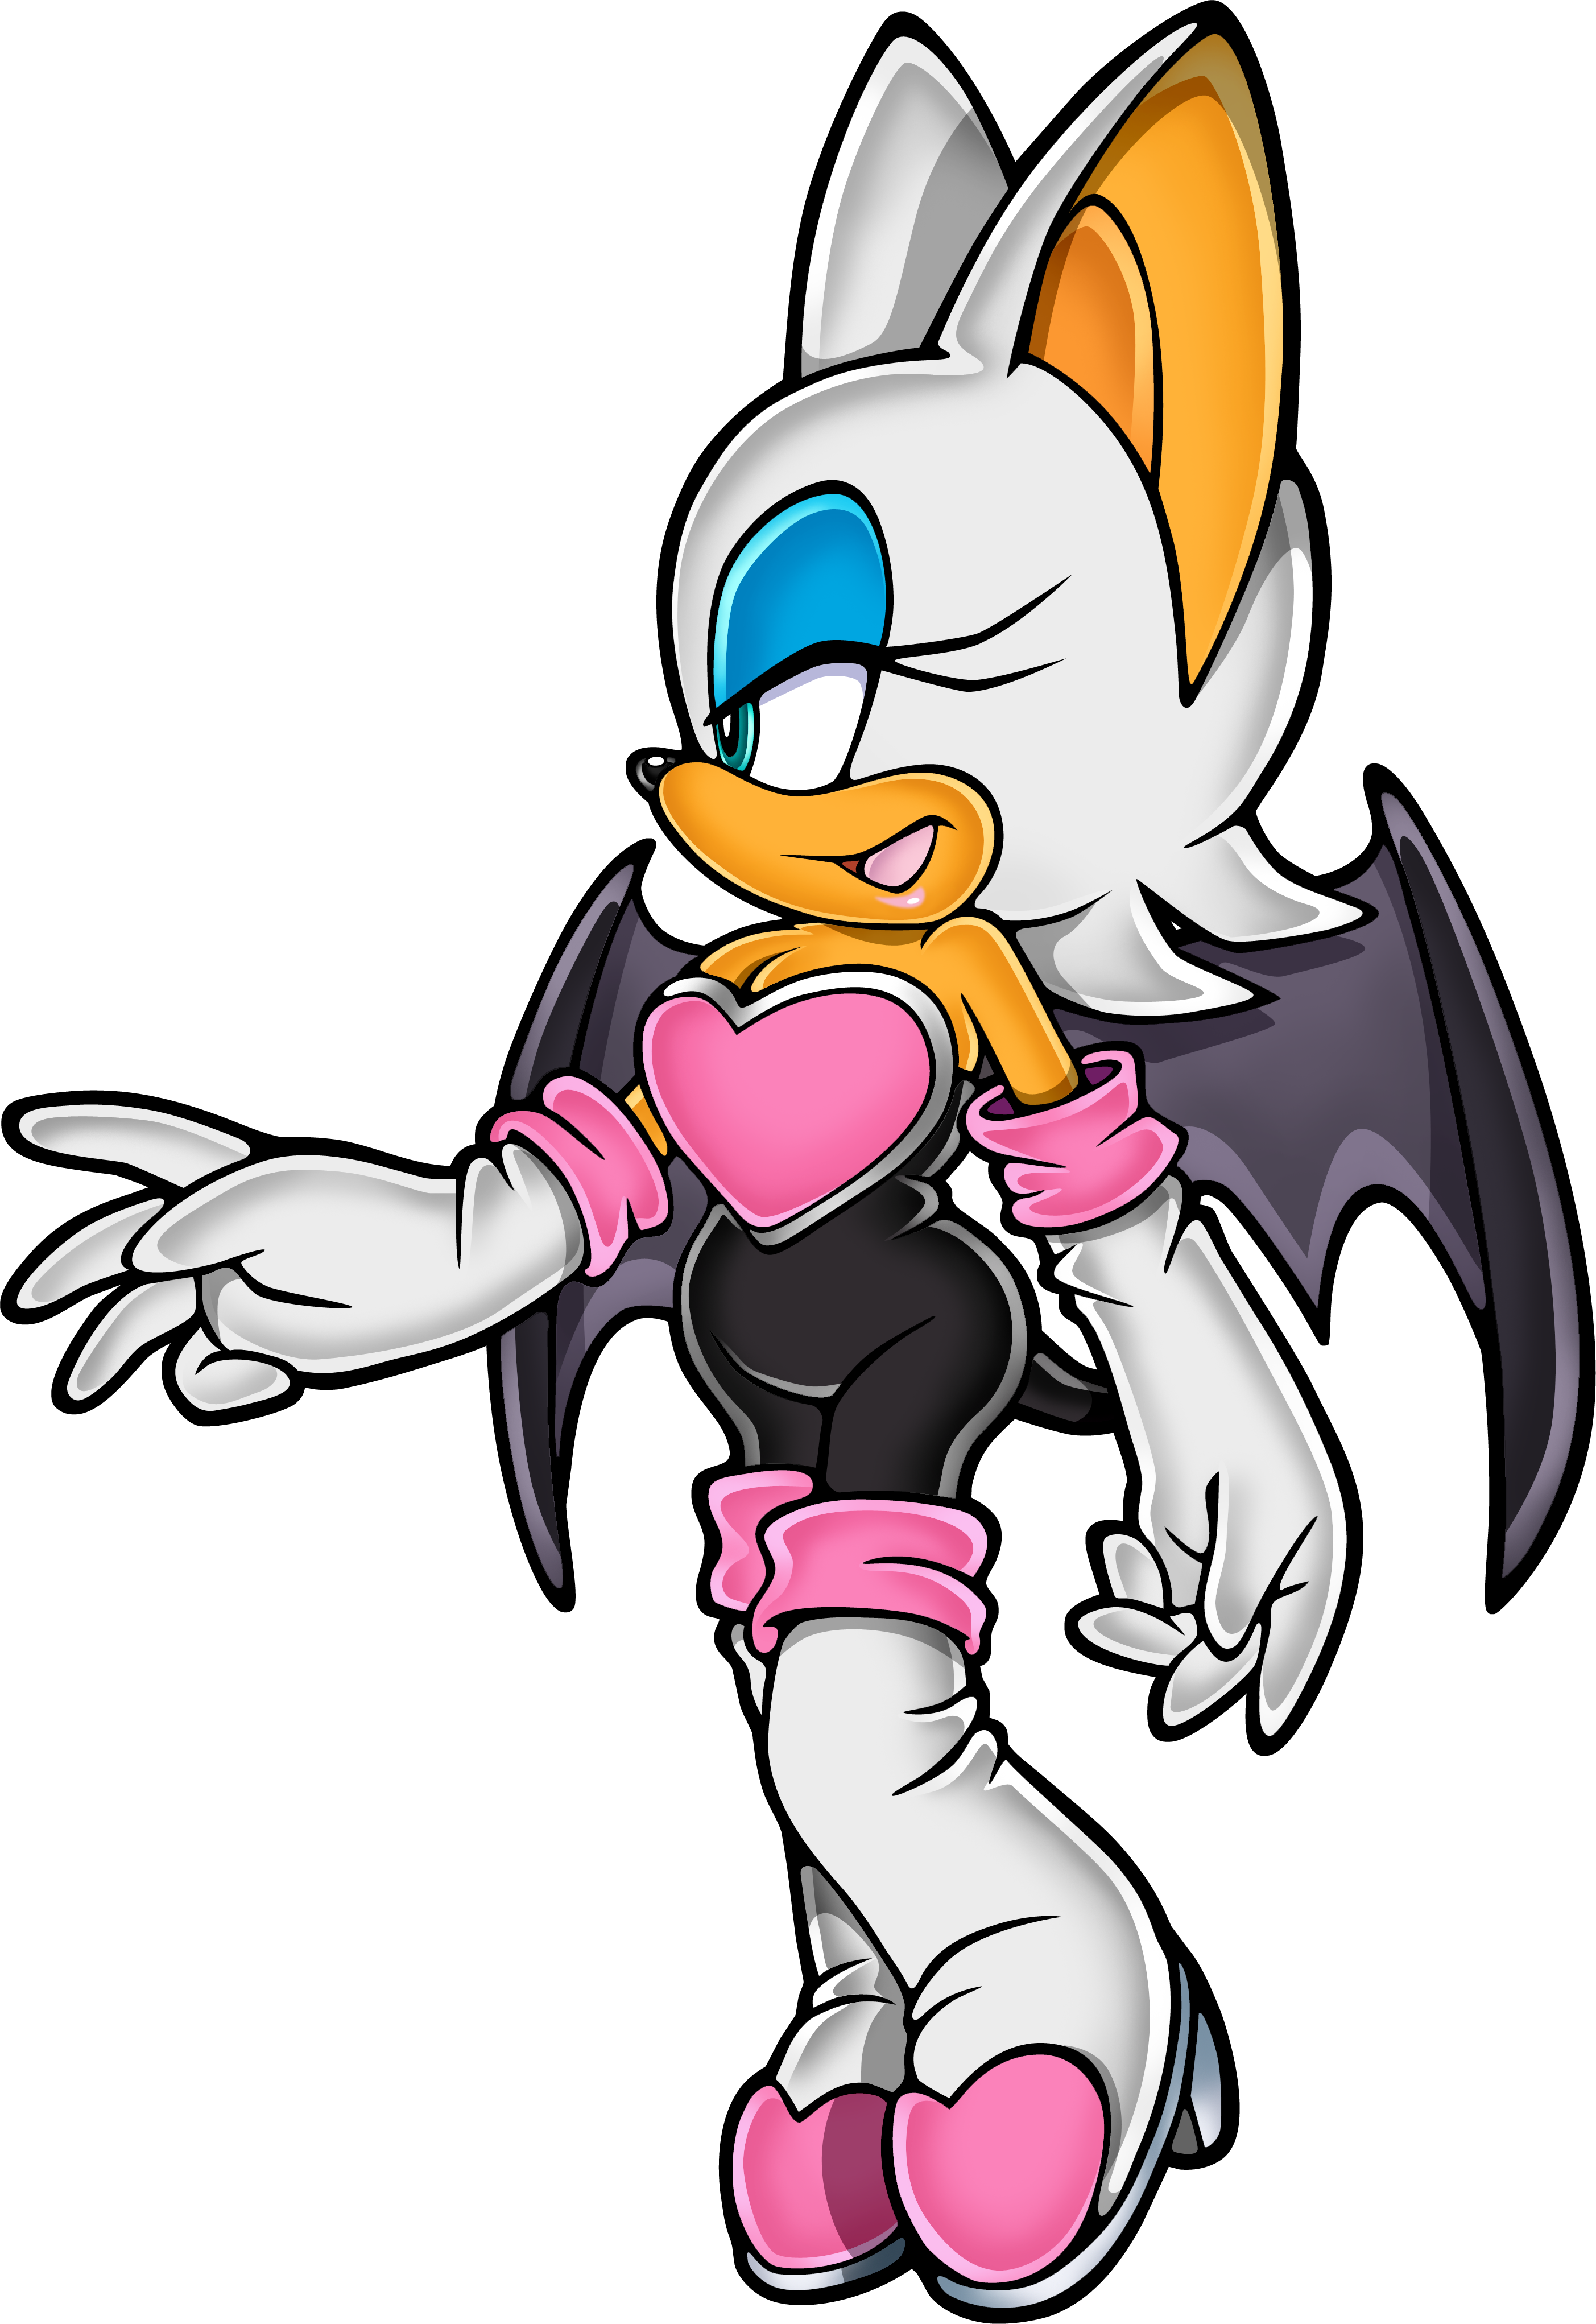 rouge bat sonic x. Featured on:Sonic Adventure 2,